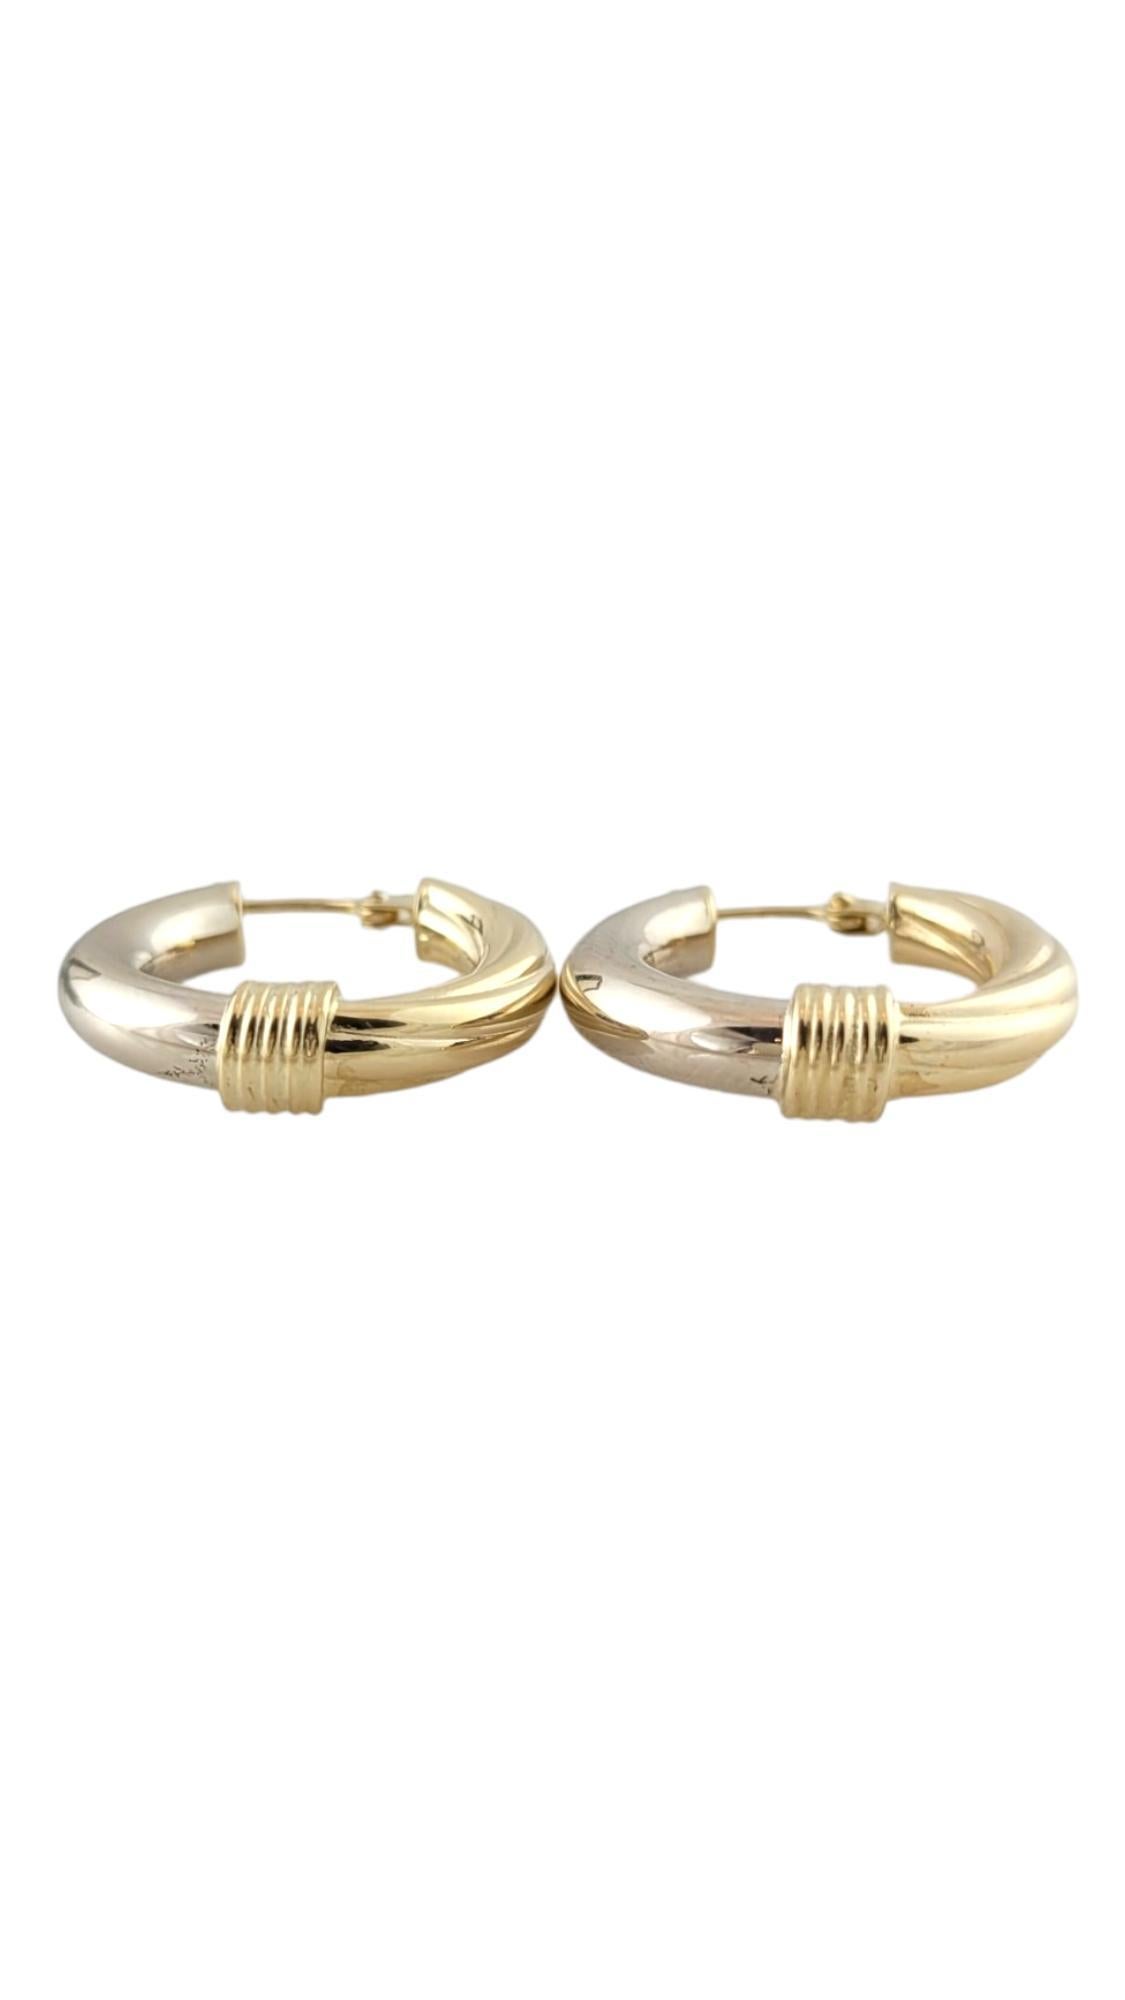 14K Yellow & White Gold Two-Toned Hoop Earrings

This gorgeous set of two-toned earrings are crafted from 14K yellow and white gold for a beautiful finish that will look amazing on anybody!

Diameter: 22.26mm
Width: 4.04mm

Weight: 2.65 dwt/ 4.11